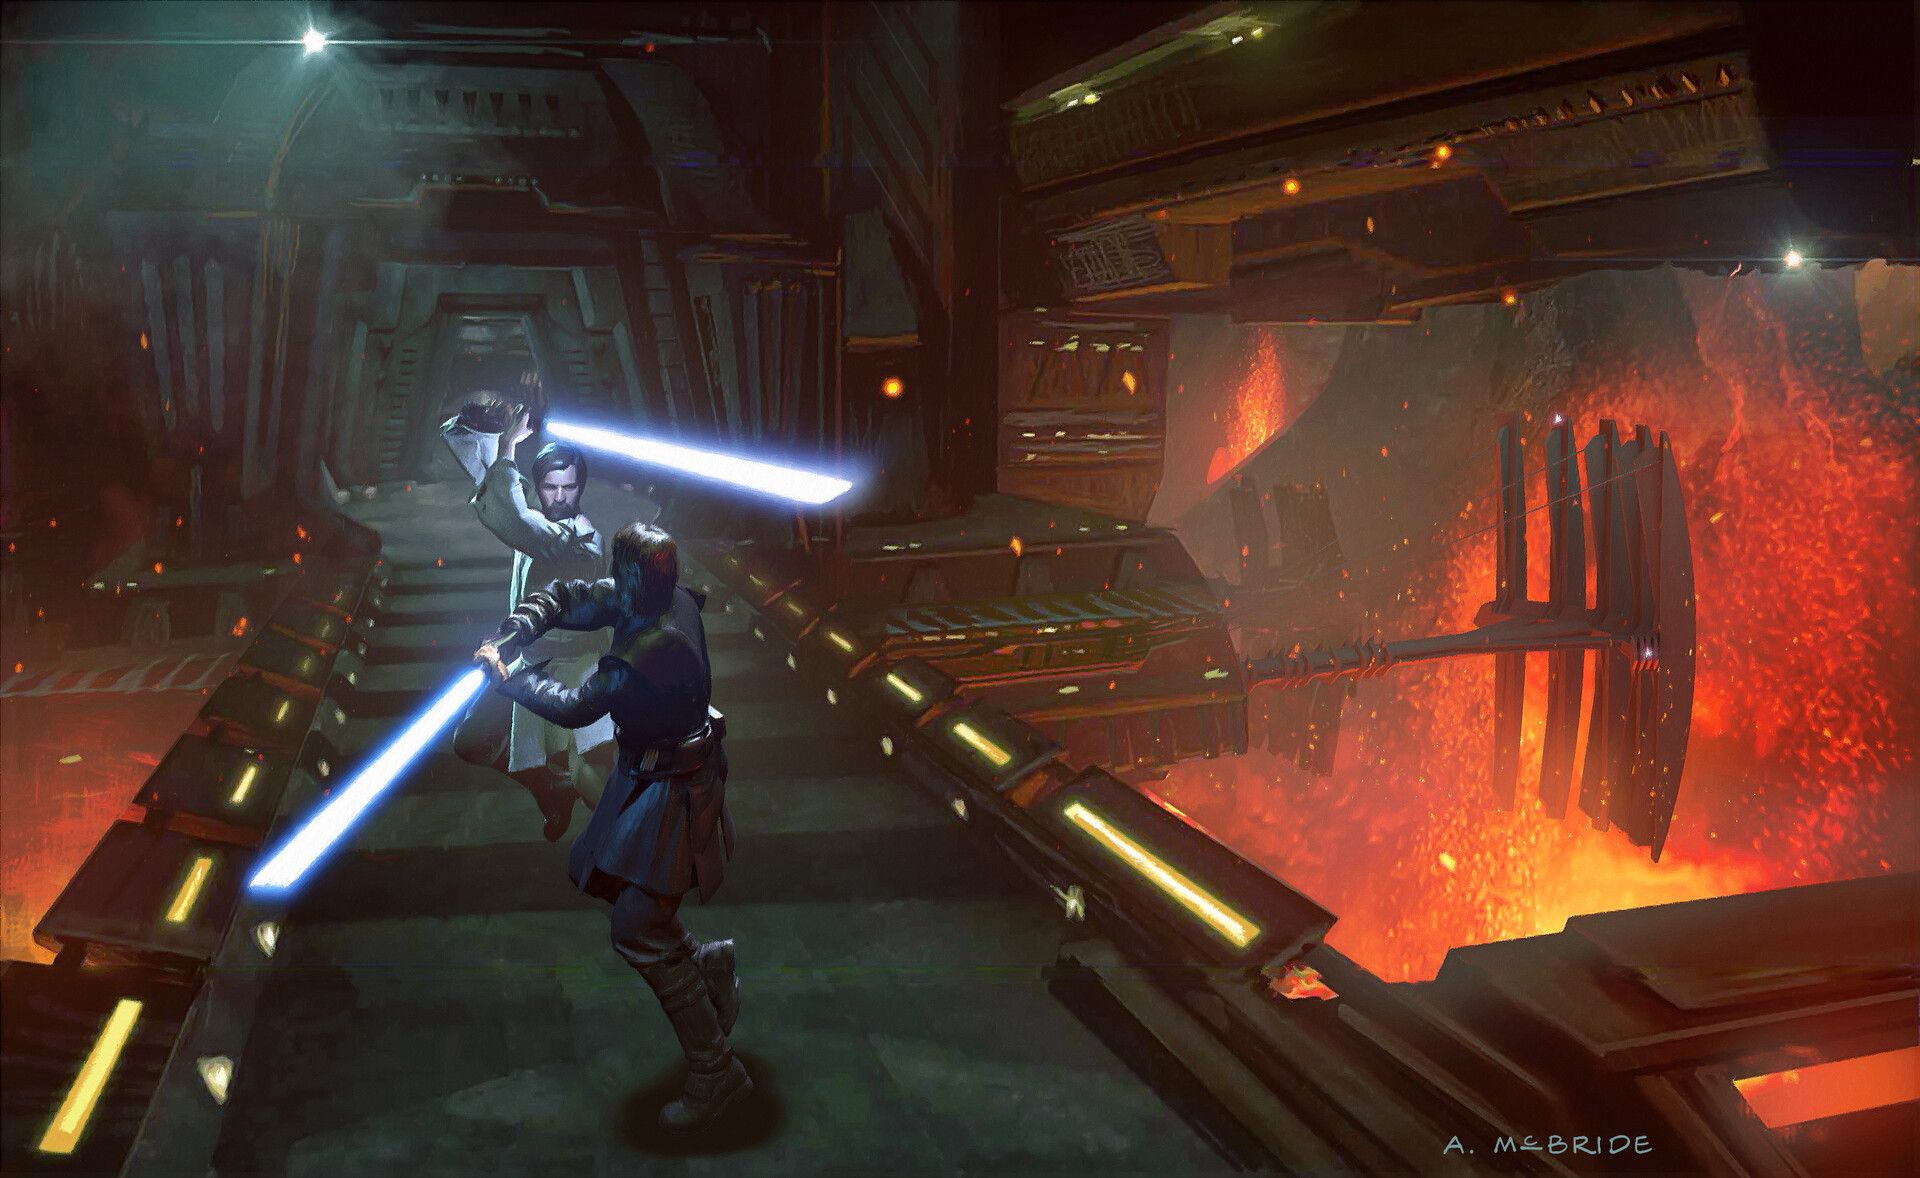 30+ Star Wars Episode III: Revenge of the Sith HD Wallpapers and Backgrounds